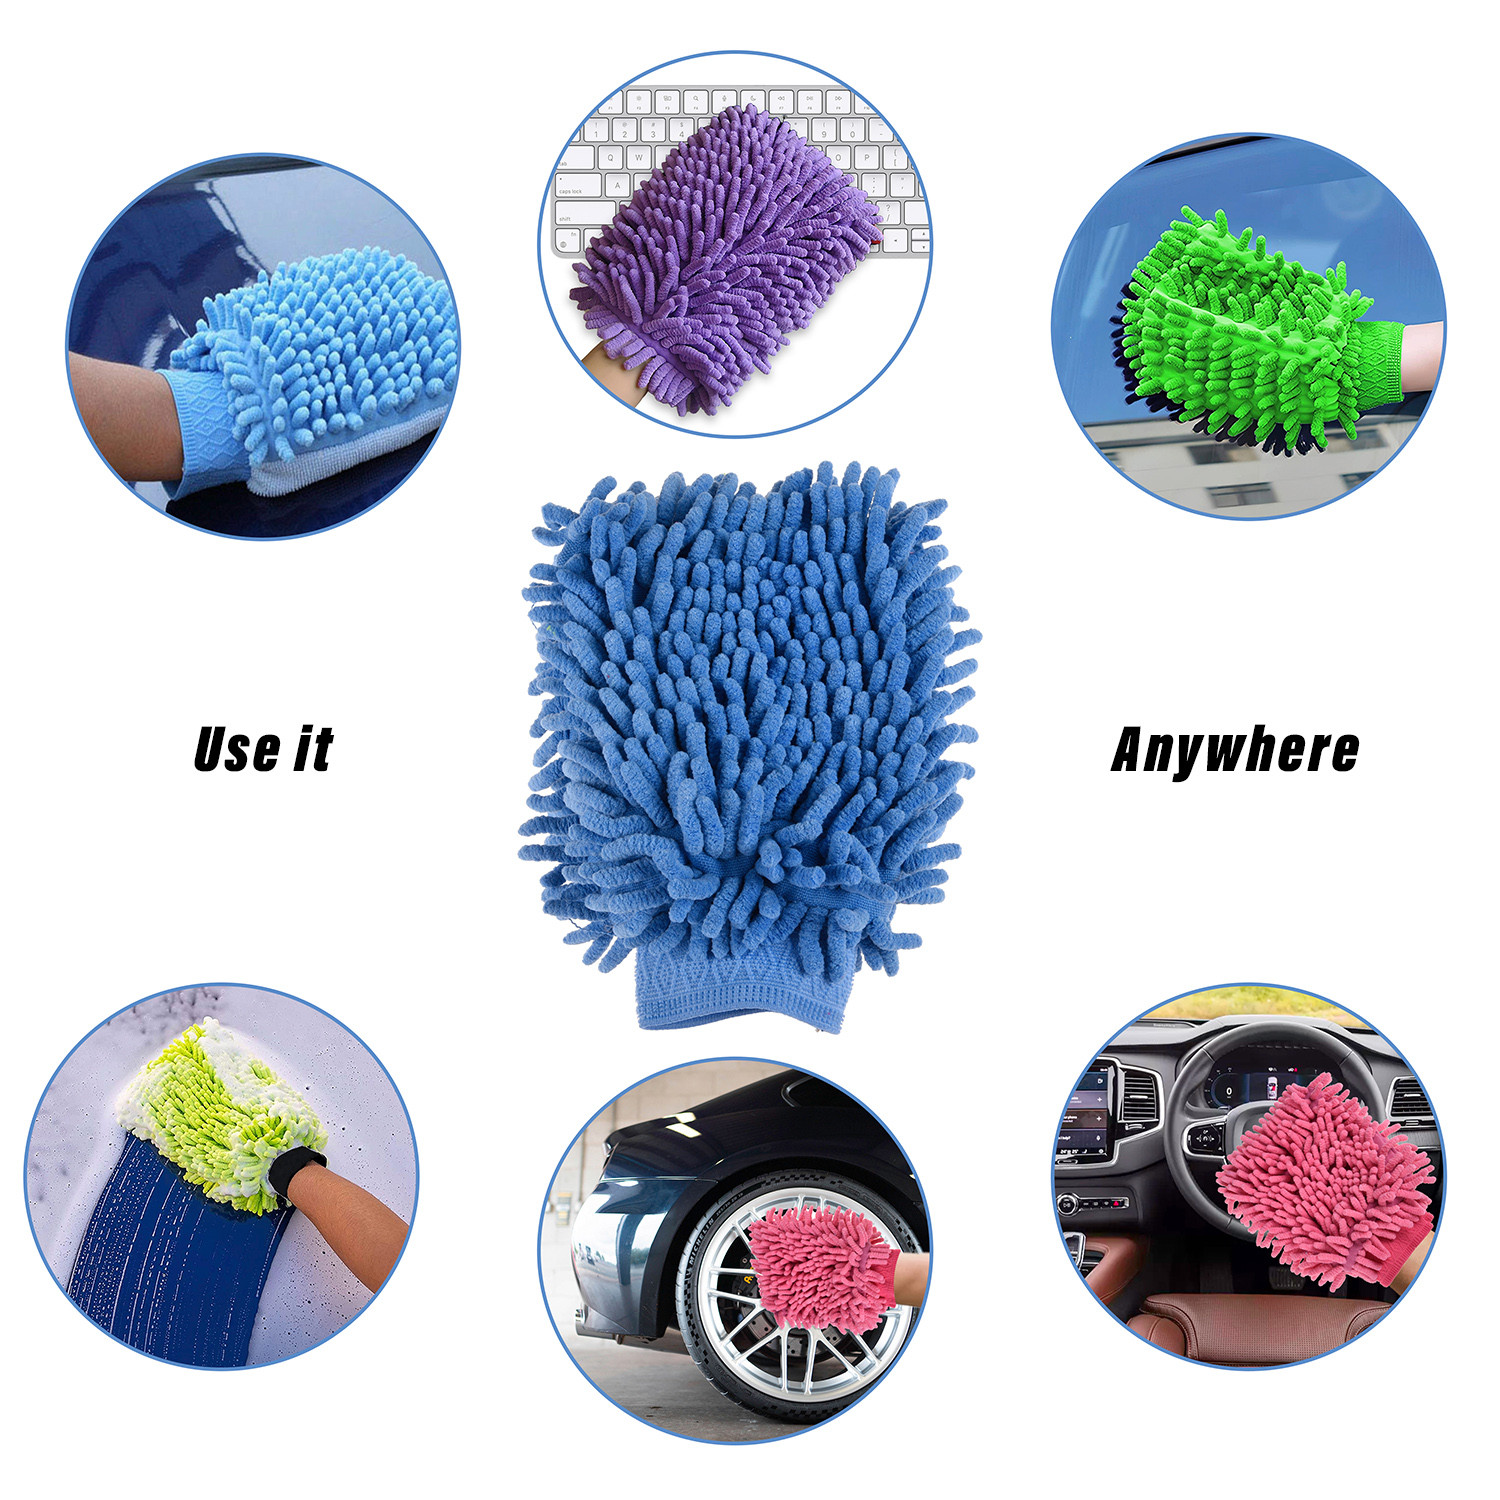 Kuber Industries Chenille Mitts|Microfiber Cleaning Gloves|Inside Waterproof Cloth Gloves|100 Gram Weighted Hand Duster|Chenille Gloves For Car|Glass|Pack of 2 (Purple & Blue)